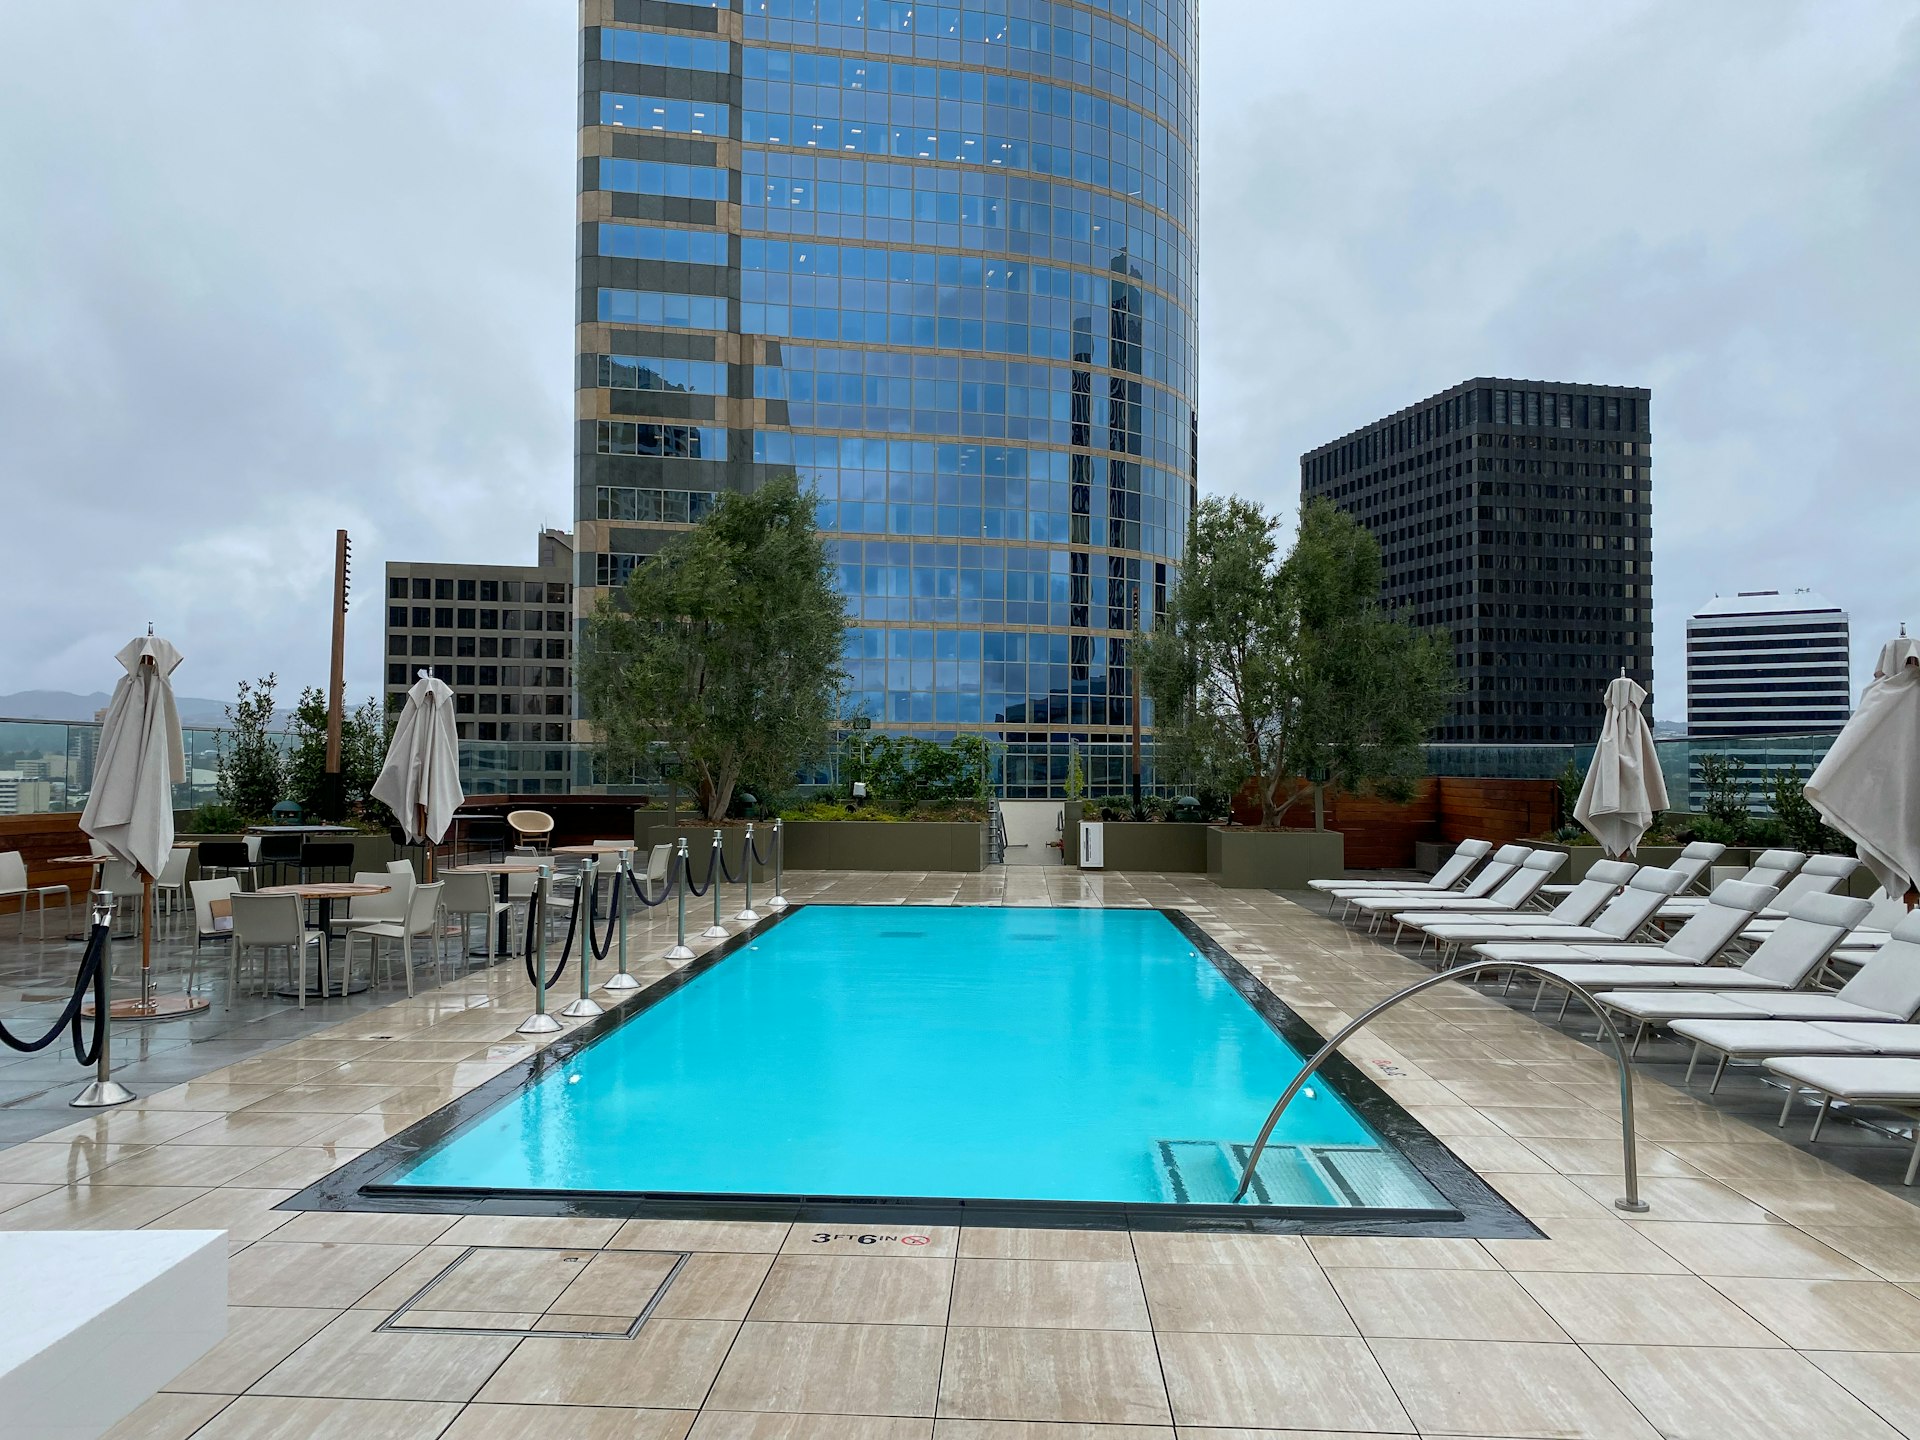 The rooftop pool at the Fairmont Century Plaza; Los Angeles, California